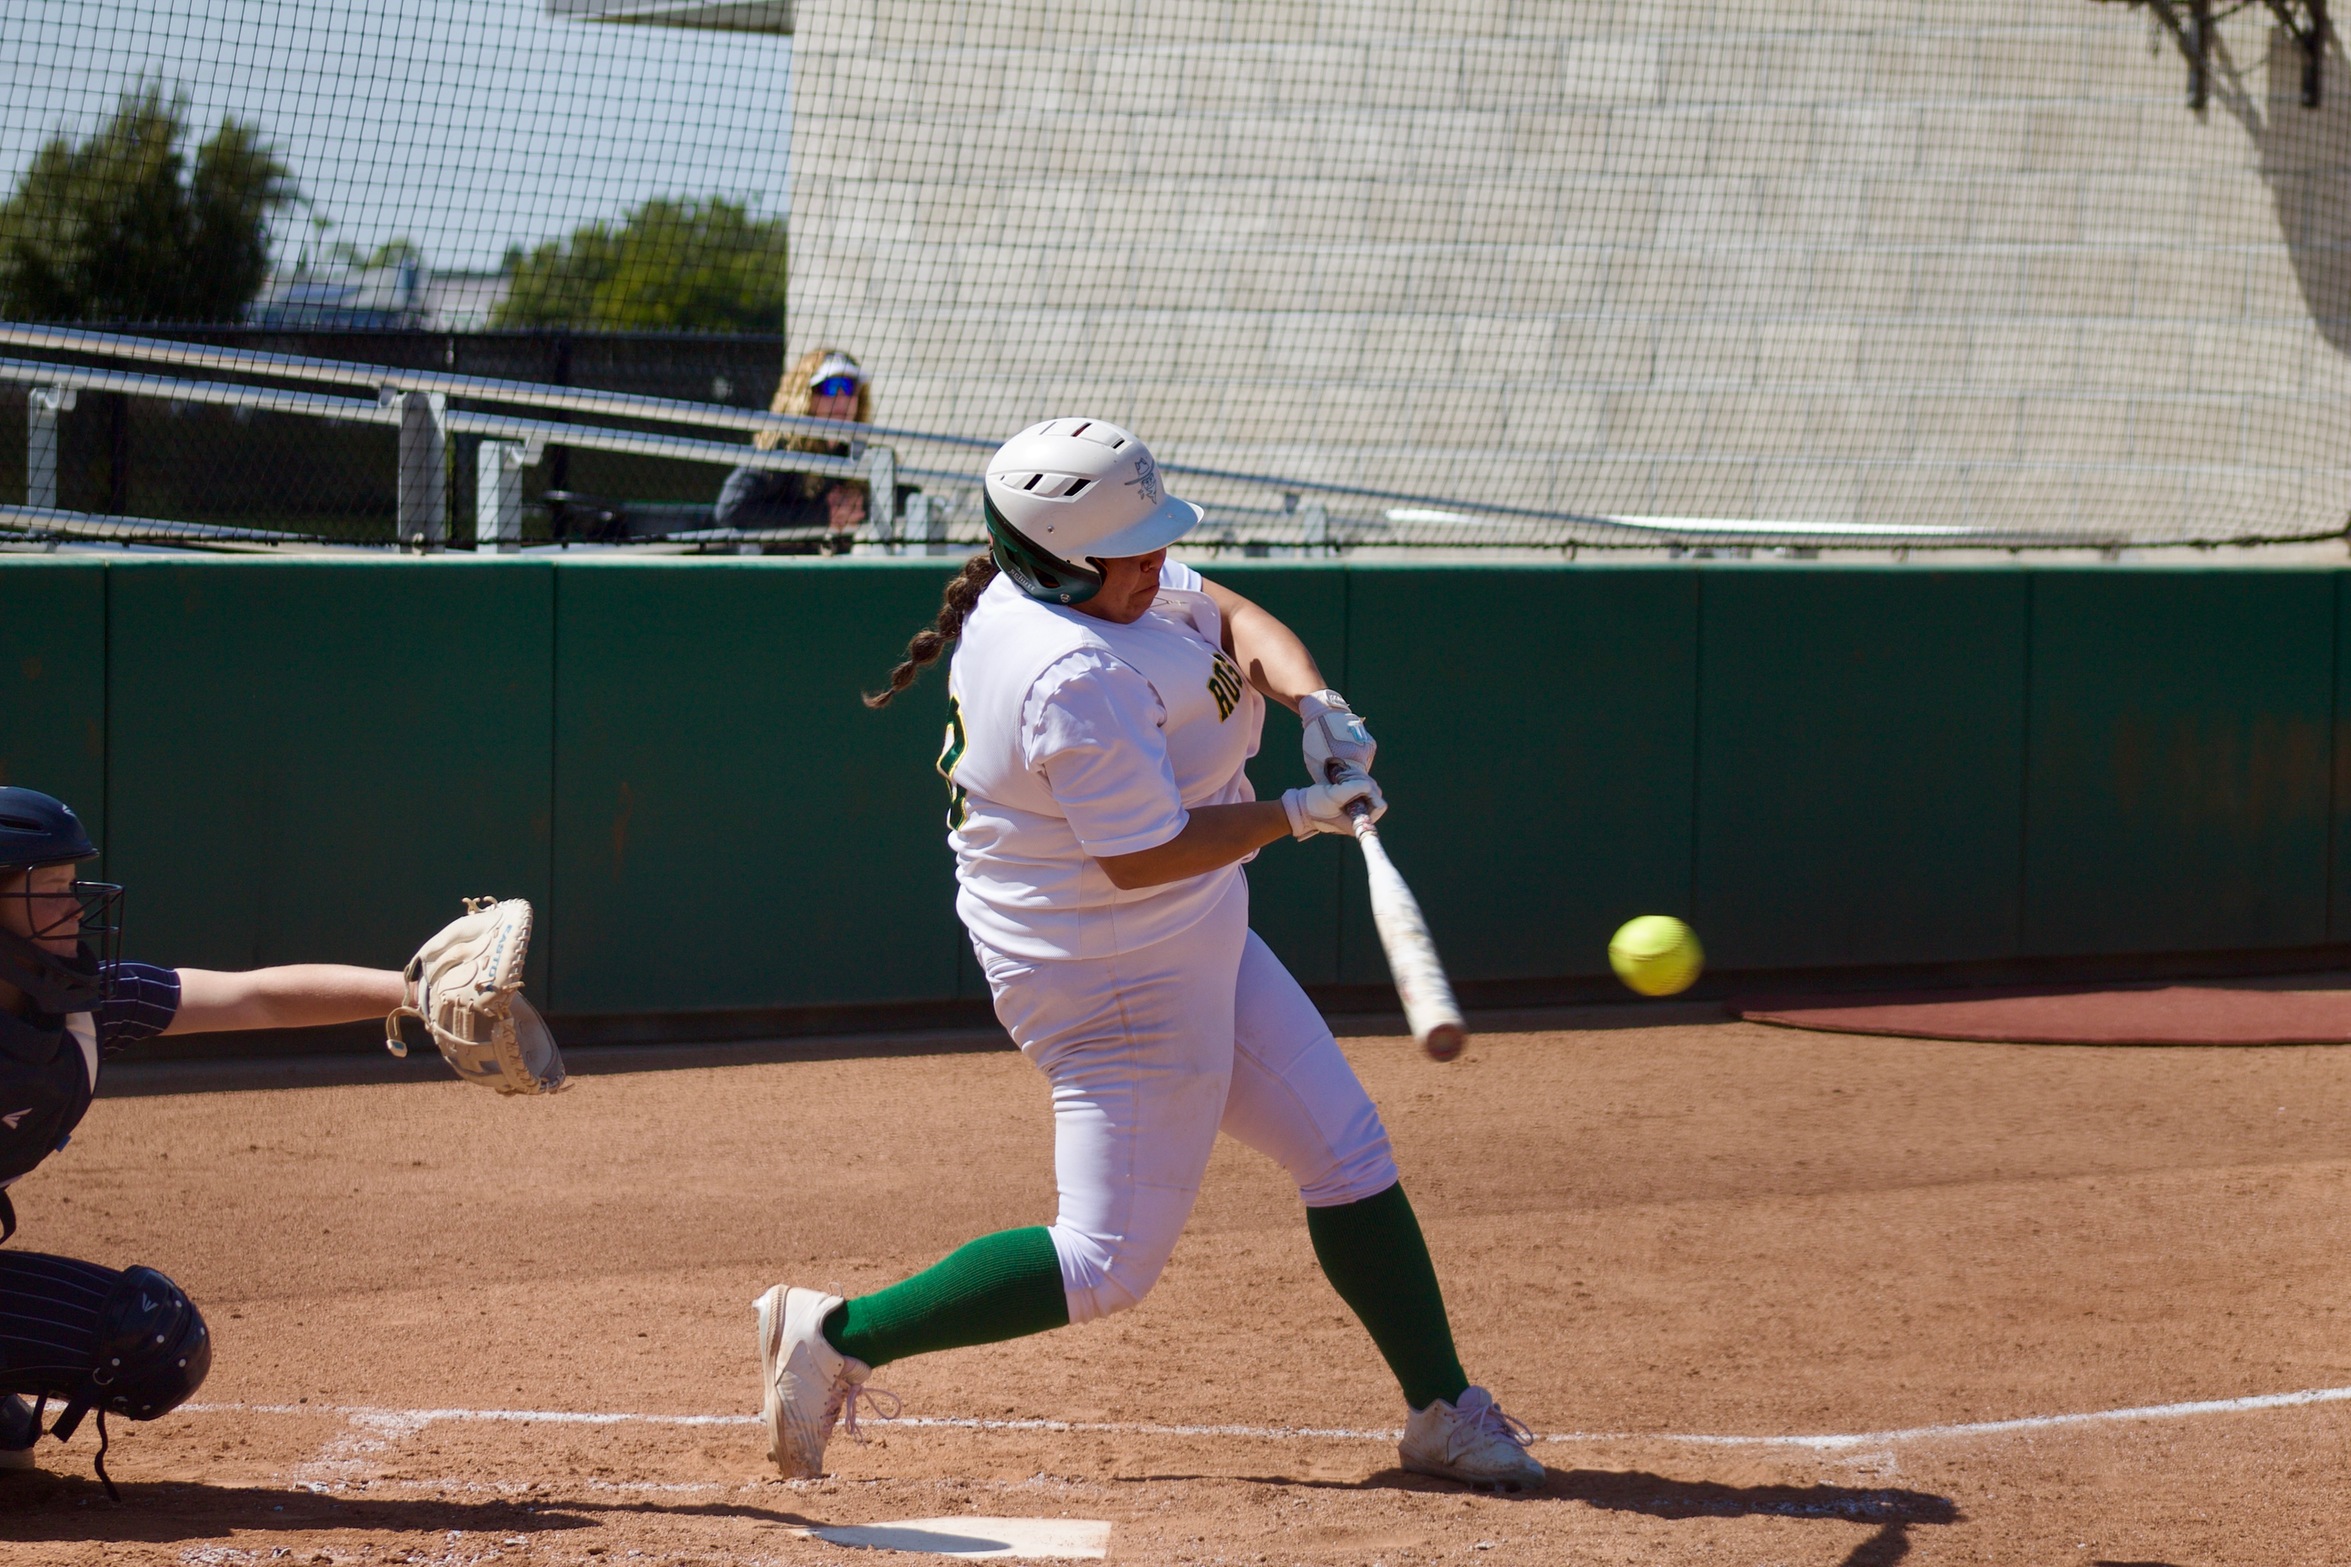 Softball: Too Many Mistakes Cost Rustlers; Offense Stifled